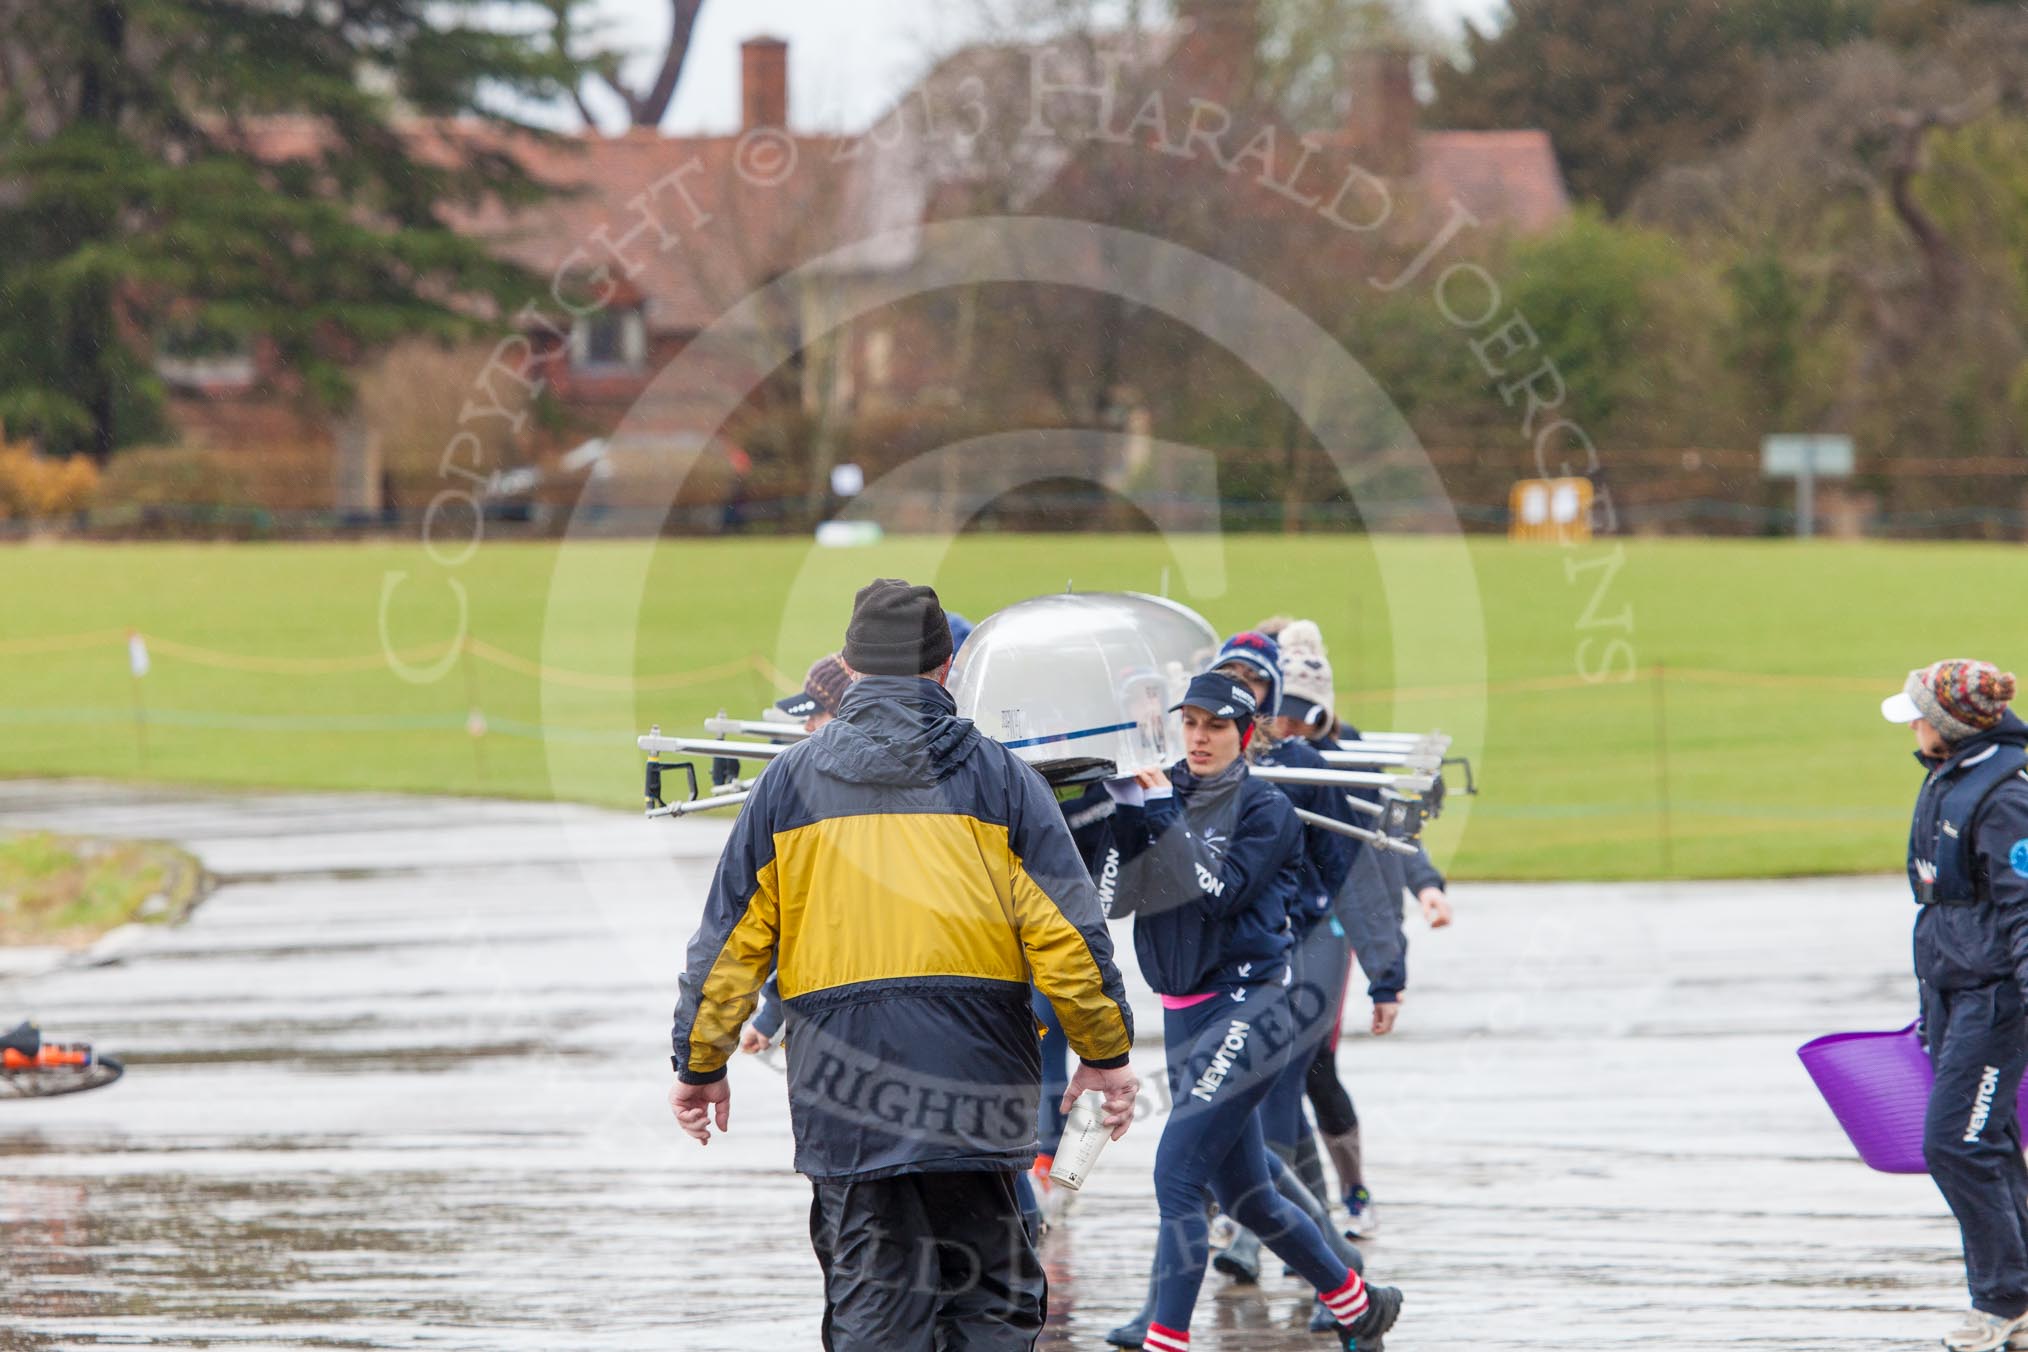 The Boat Race season 2013 - fixture OUWBC vs Olympians: On the way to meet the Olympians - the crew of the OUWBC reserve boat Osiris carrying their boat towards Dorney Lake..
Dorney Lake,
Dorney, Windsor,
Buckinghamshire,
United Kingdom,
on 16 March 2013 at 10:57, image #8